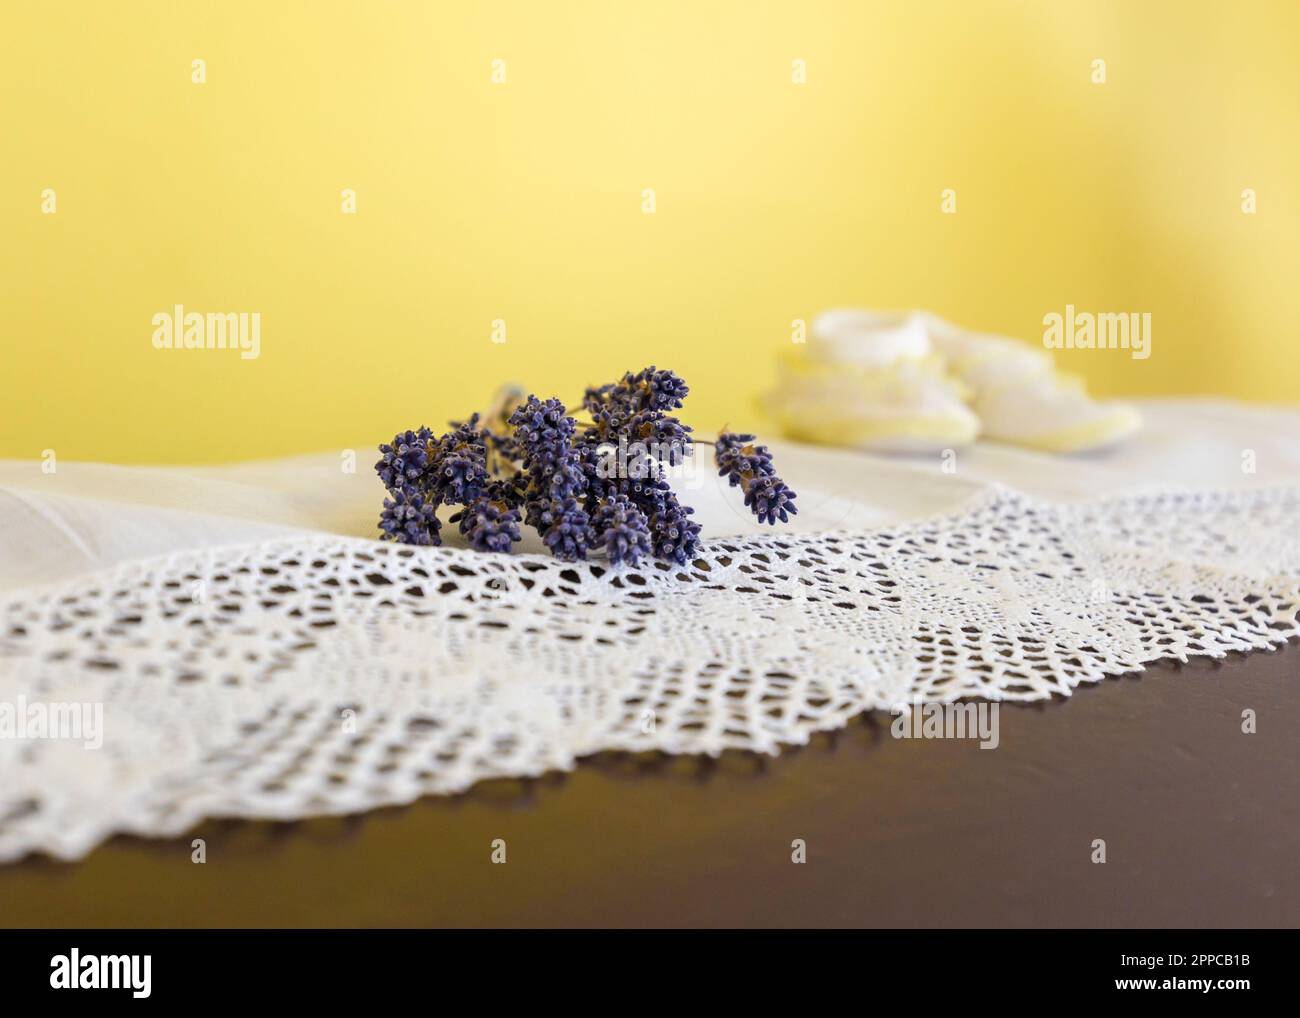 Gold Twine Stock Photos and Pictures - 3,387 Images